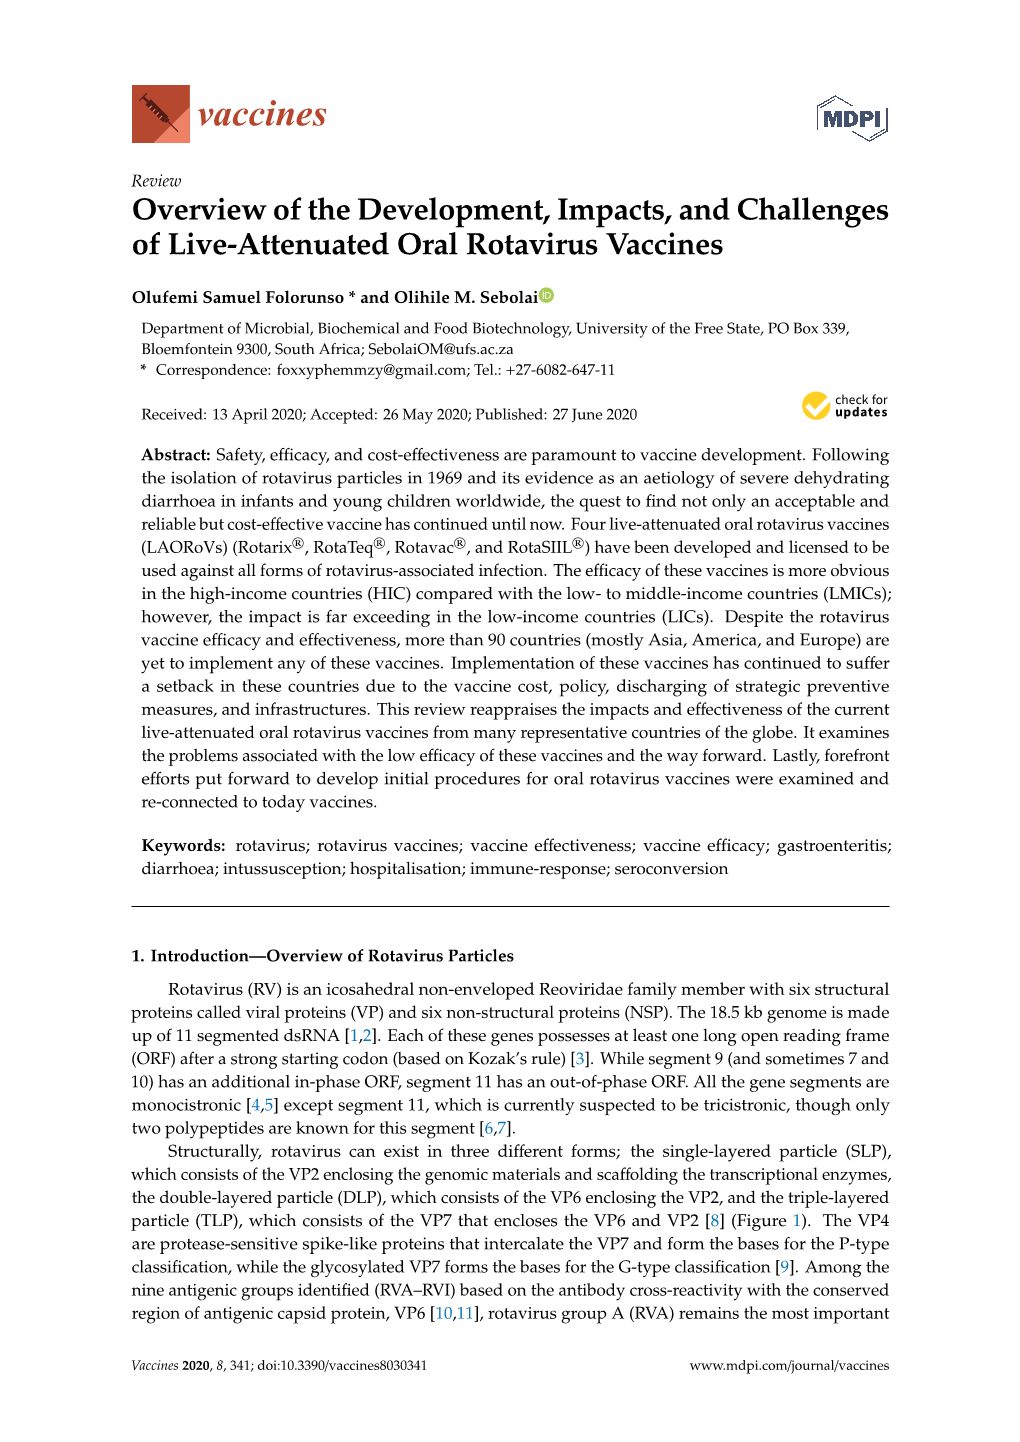 Overview of the Development, Impacts, and Challenges of Live-Attenuated Oral Rotavirus Vaccines